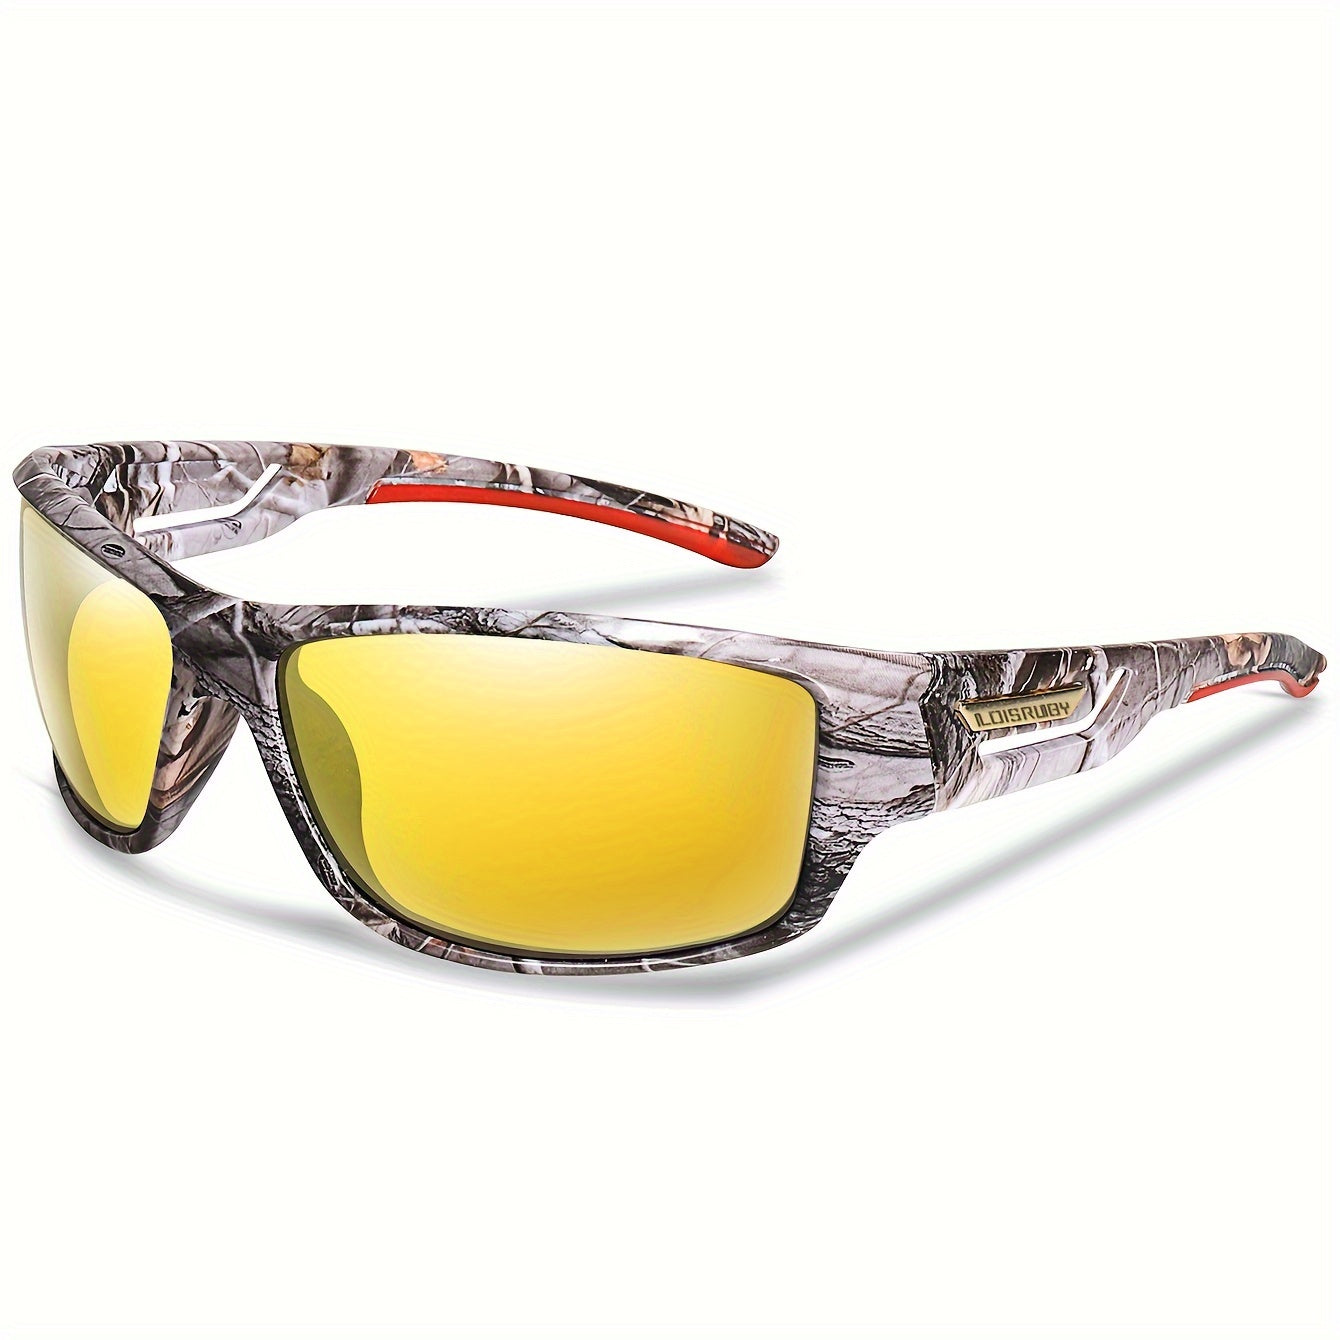 Polarized Night Vision Cycling Driving Sunglasses For Men And Women, UV400 Protection Sunglasses Male Female Windproof Eyewear